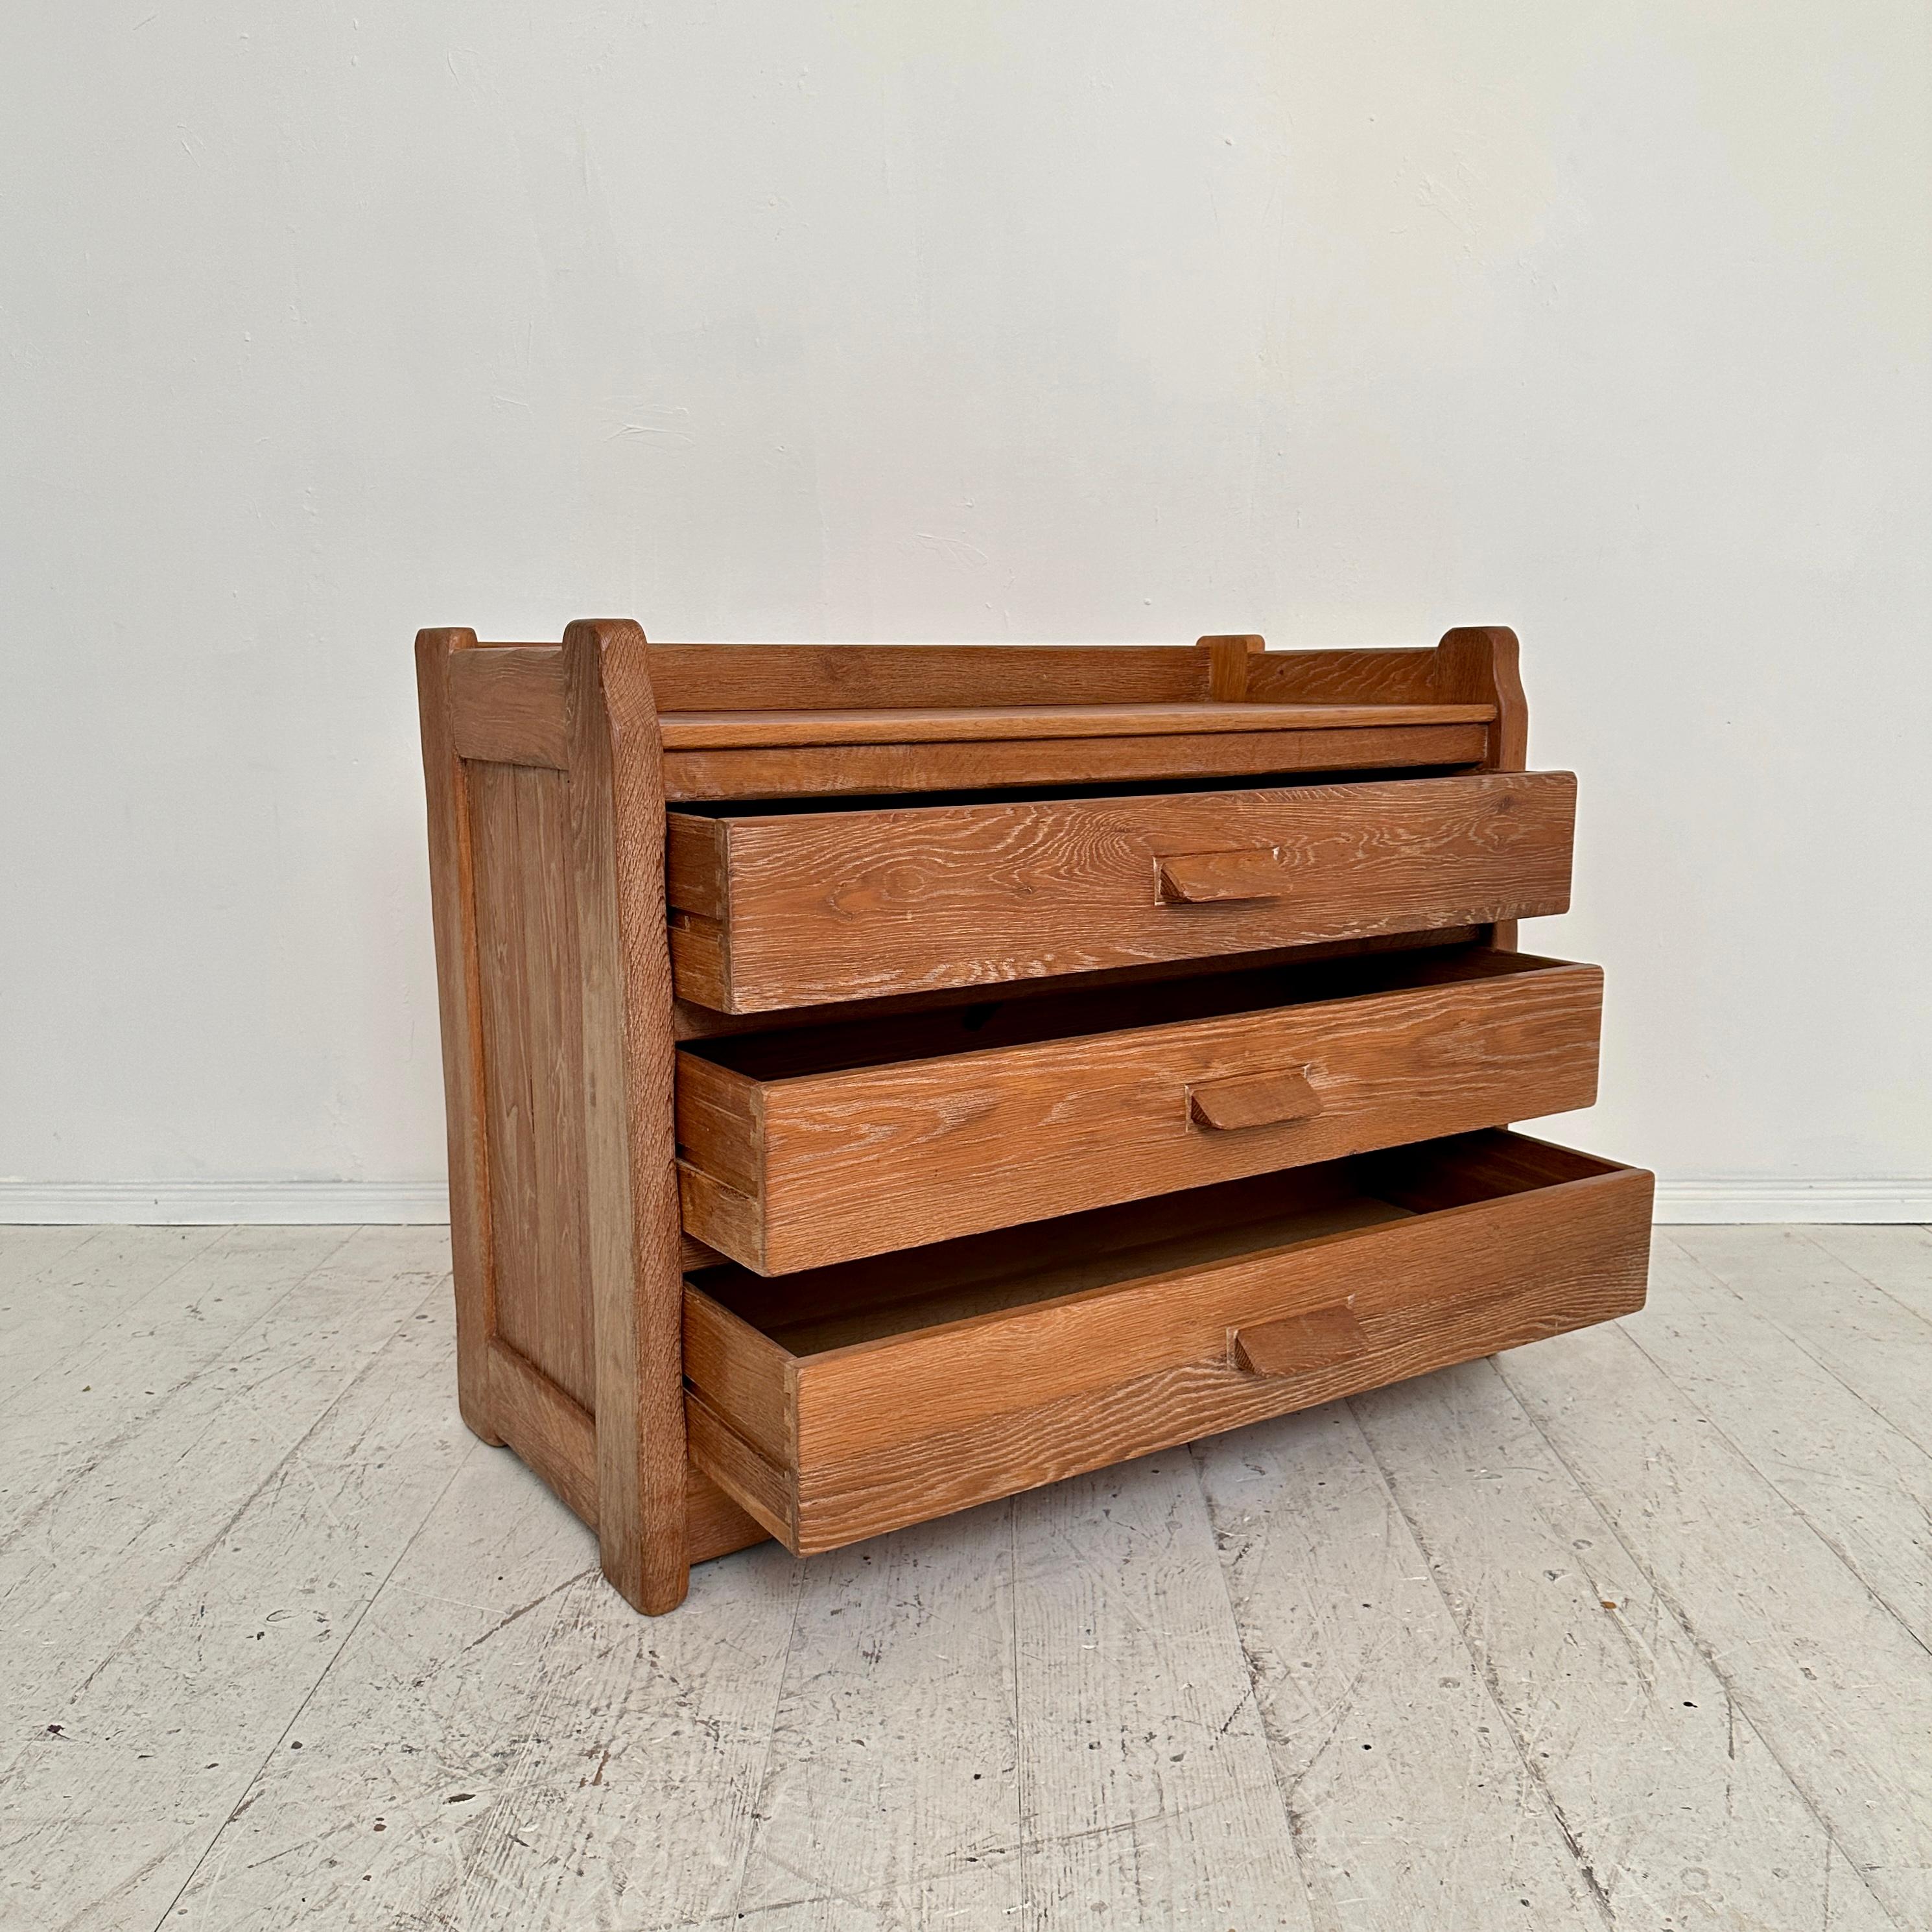 1970s Brutalist Chest of Drawers in Solid Washed Oak by de Puydt, around 1974 For Sale 2